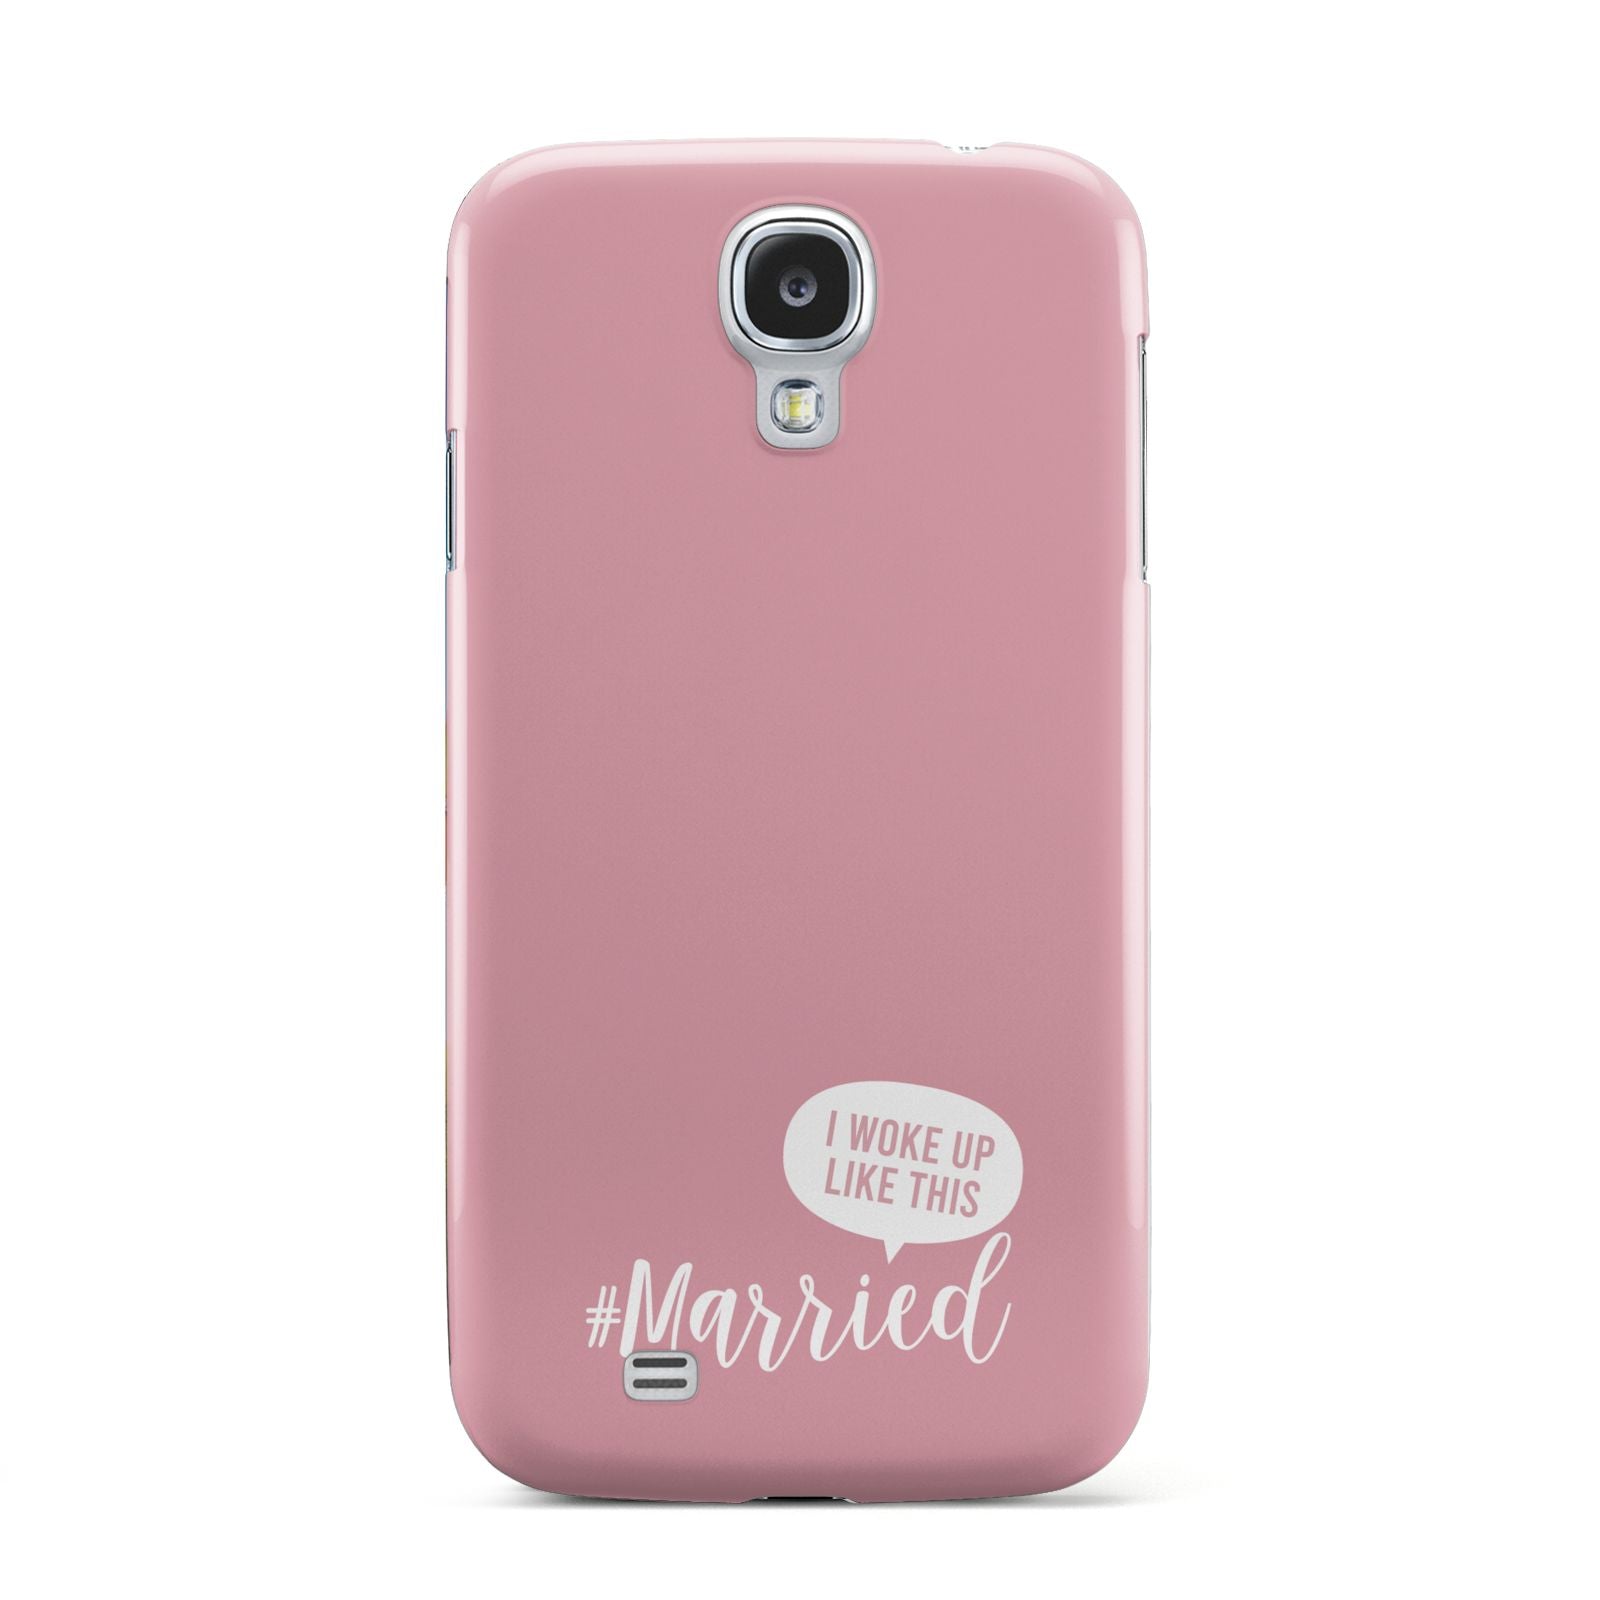 I Woke Up Like This Married Samsung Galaxy S4 Case